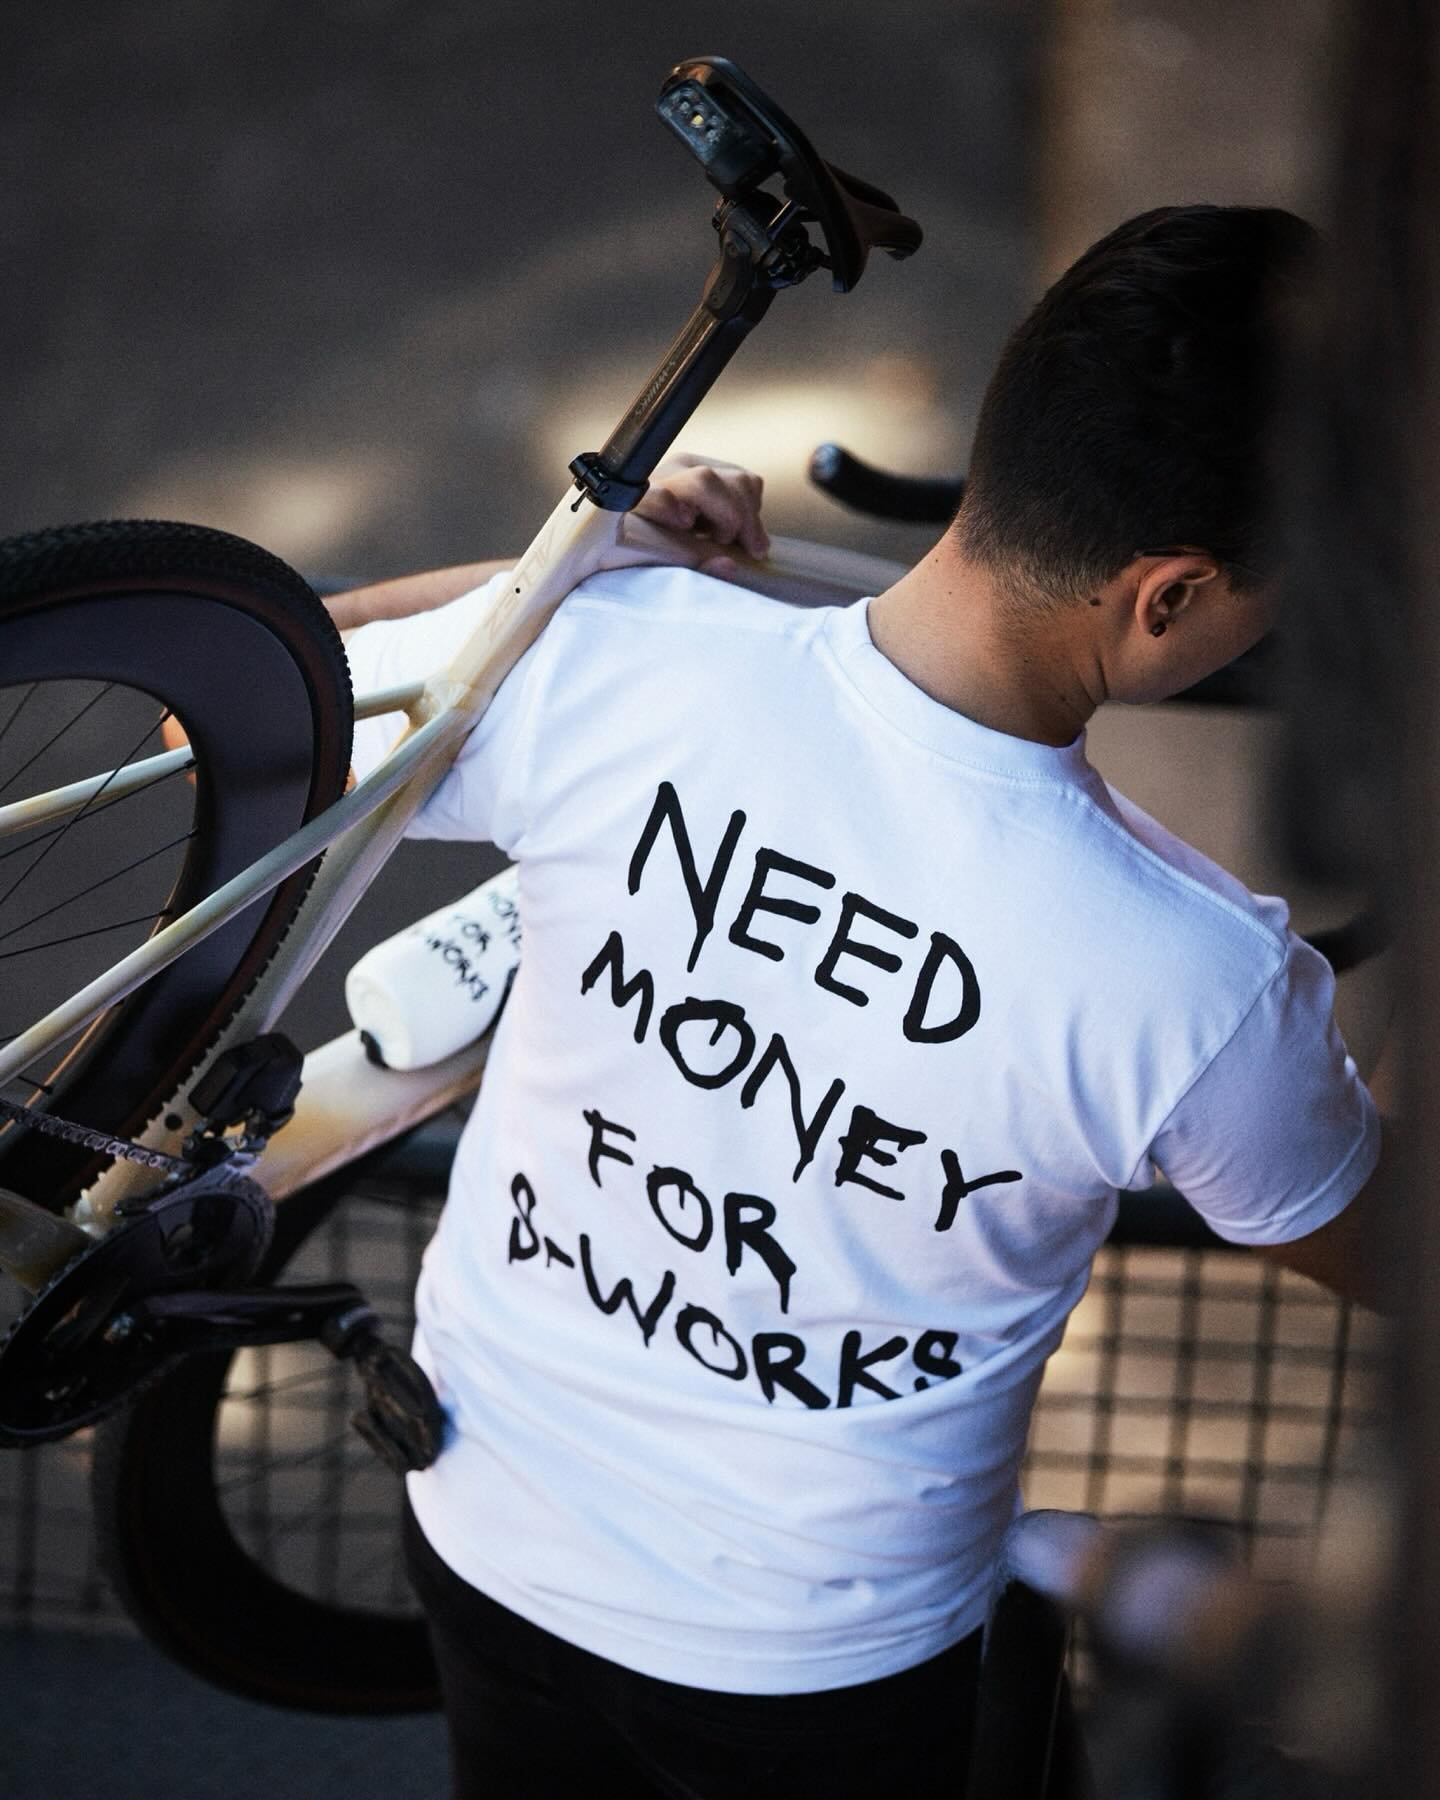 💸 NMFSW 💸

Introducing the &lsquo;Need Money For S-Works&rsquo; line! Whether you&rsquo;re saving up for S-Works or already shredding on one, we&rsquo;ve got your back!

First up, our new US-made 🇺🇸 Heavyweight Ringspun cotton tees, available in 